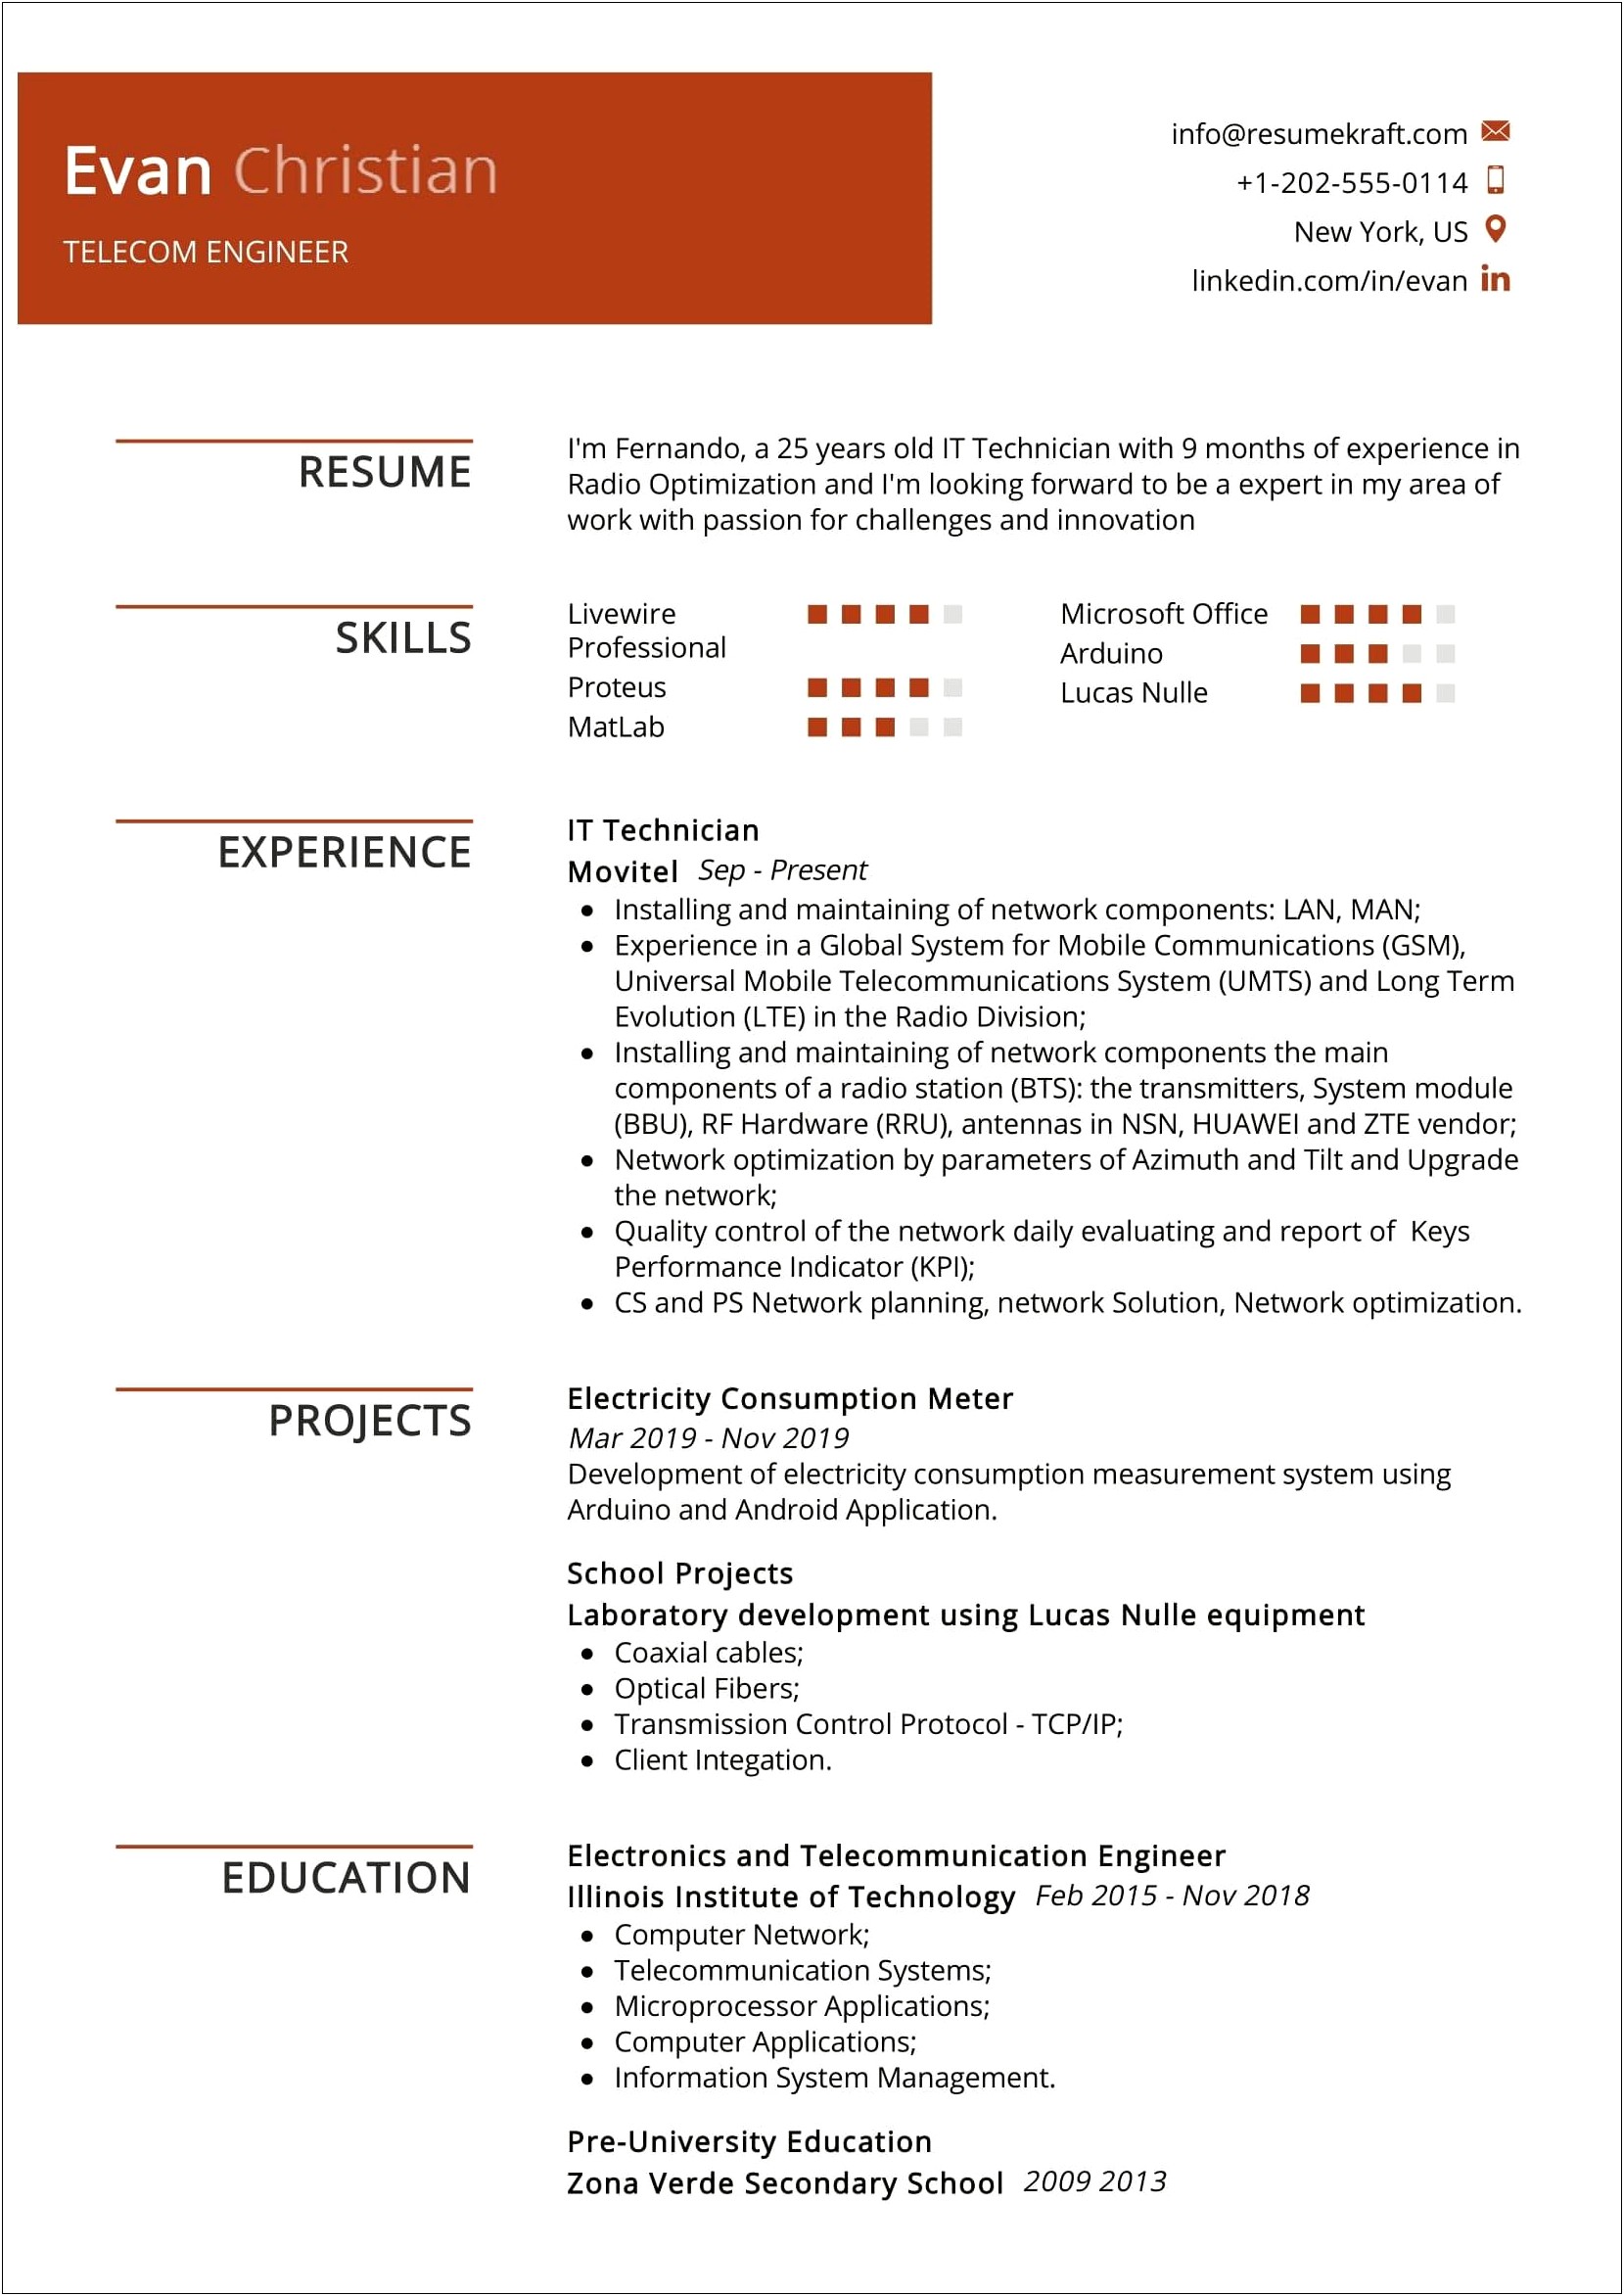 Structured Cabling Engineer Resume Sample